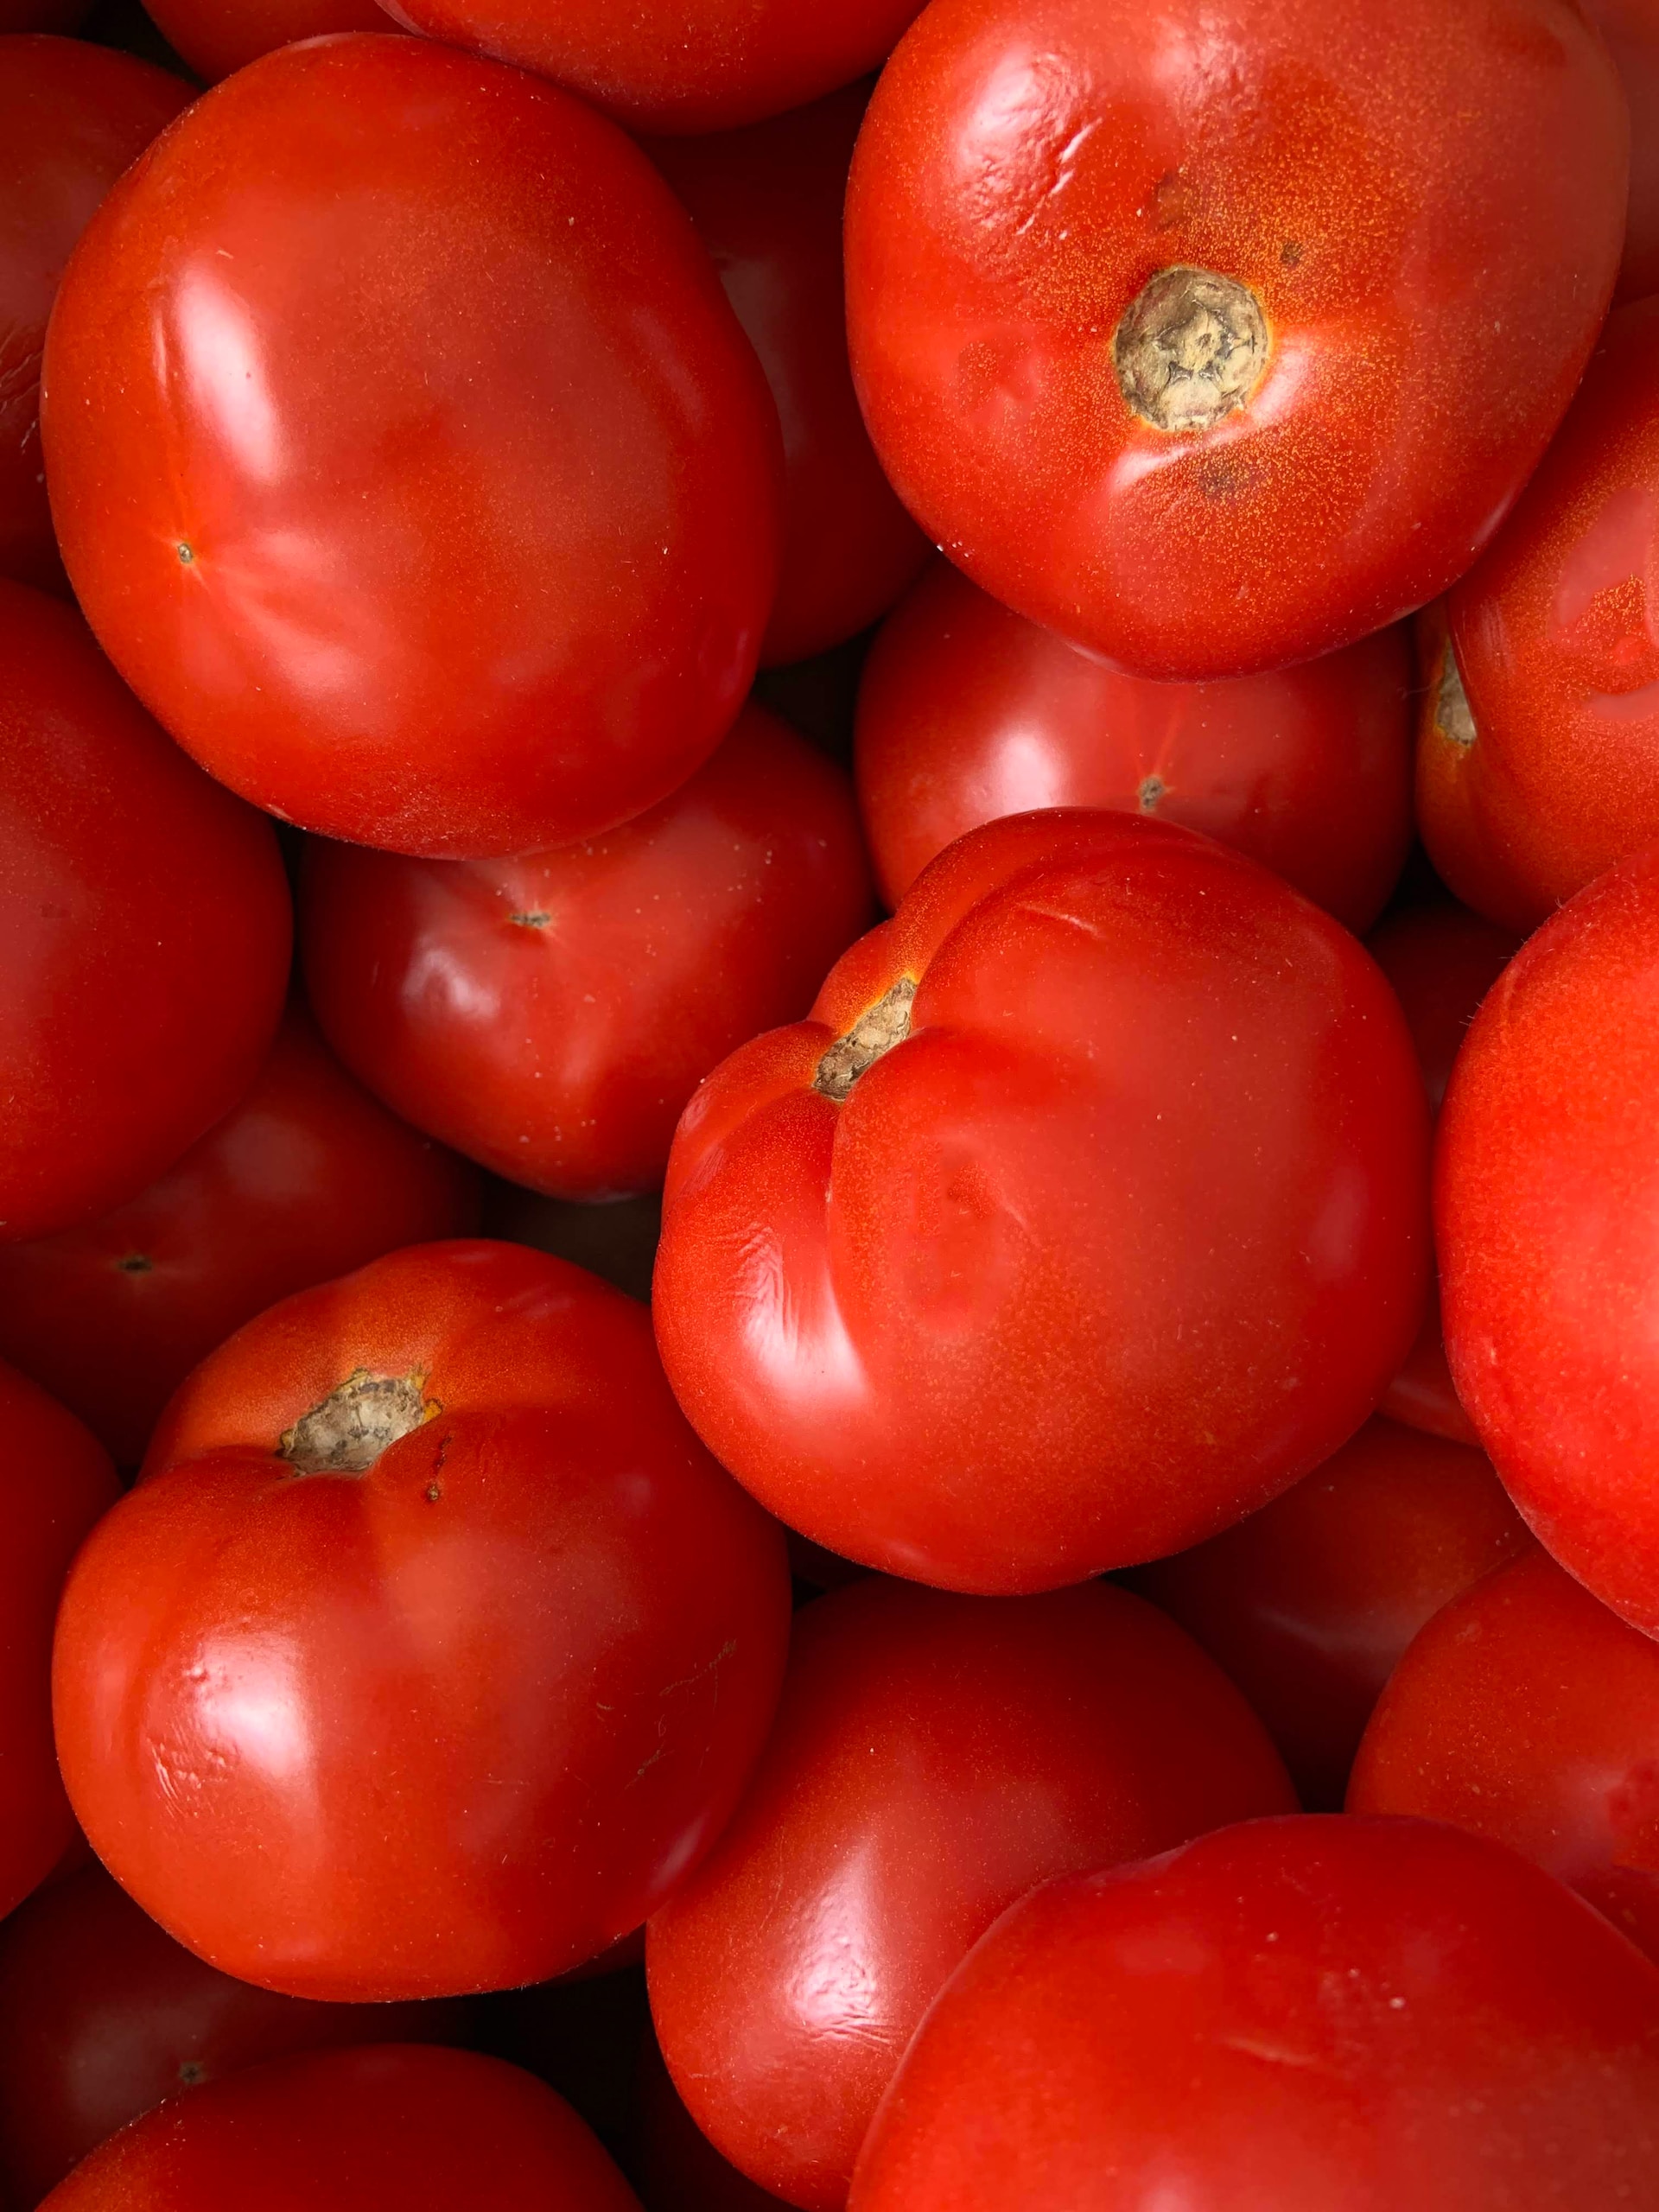 Are Tomatoes Keto? Tomatoes on a Keto Diet: Tips, Recipes, and Substitutes